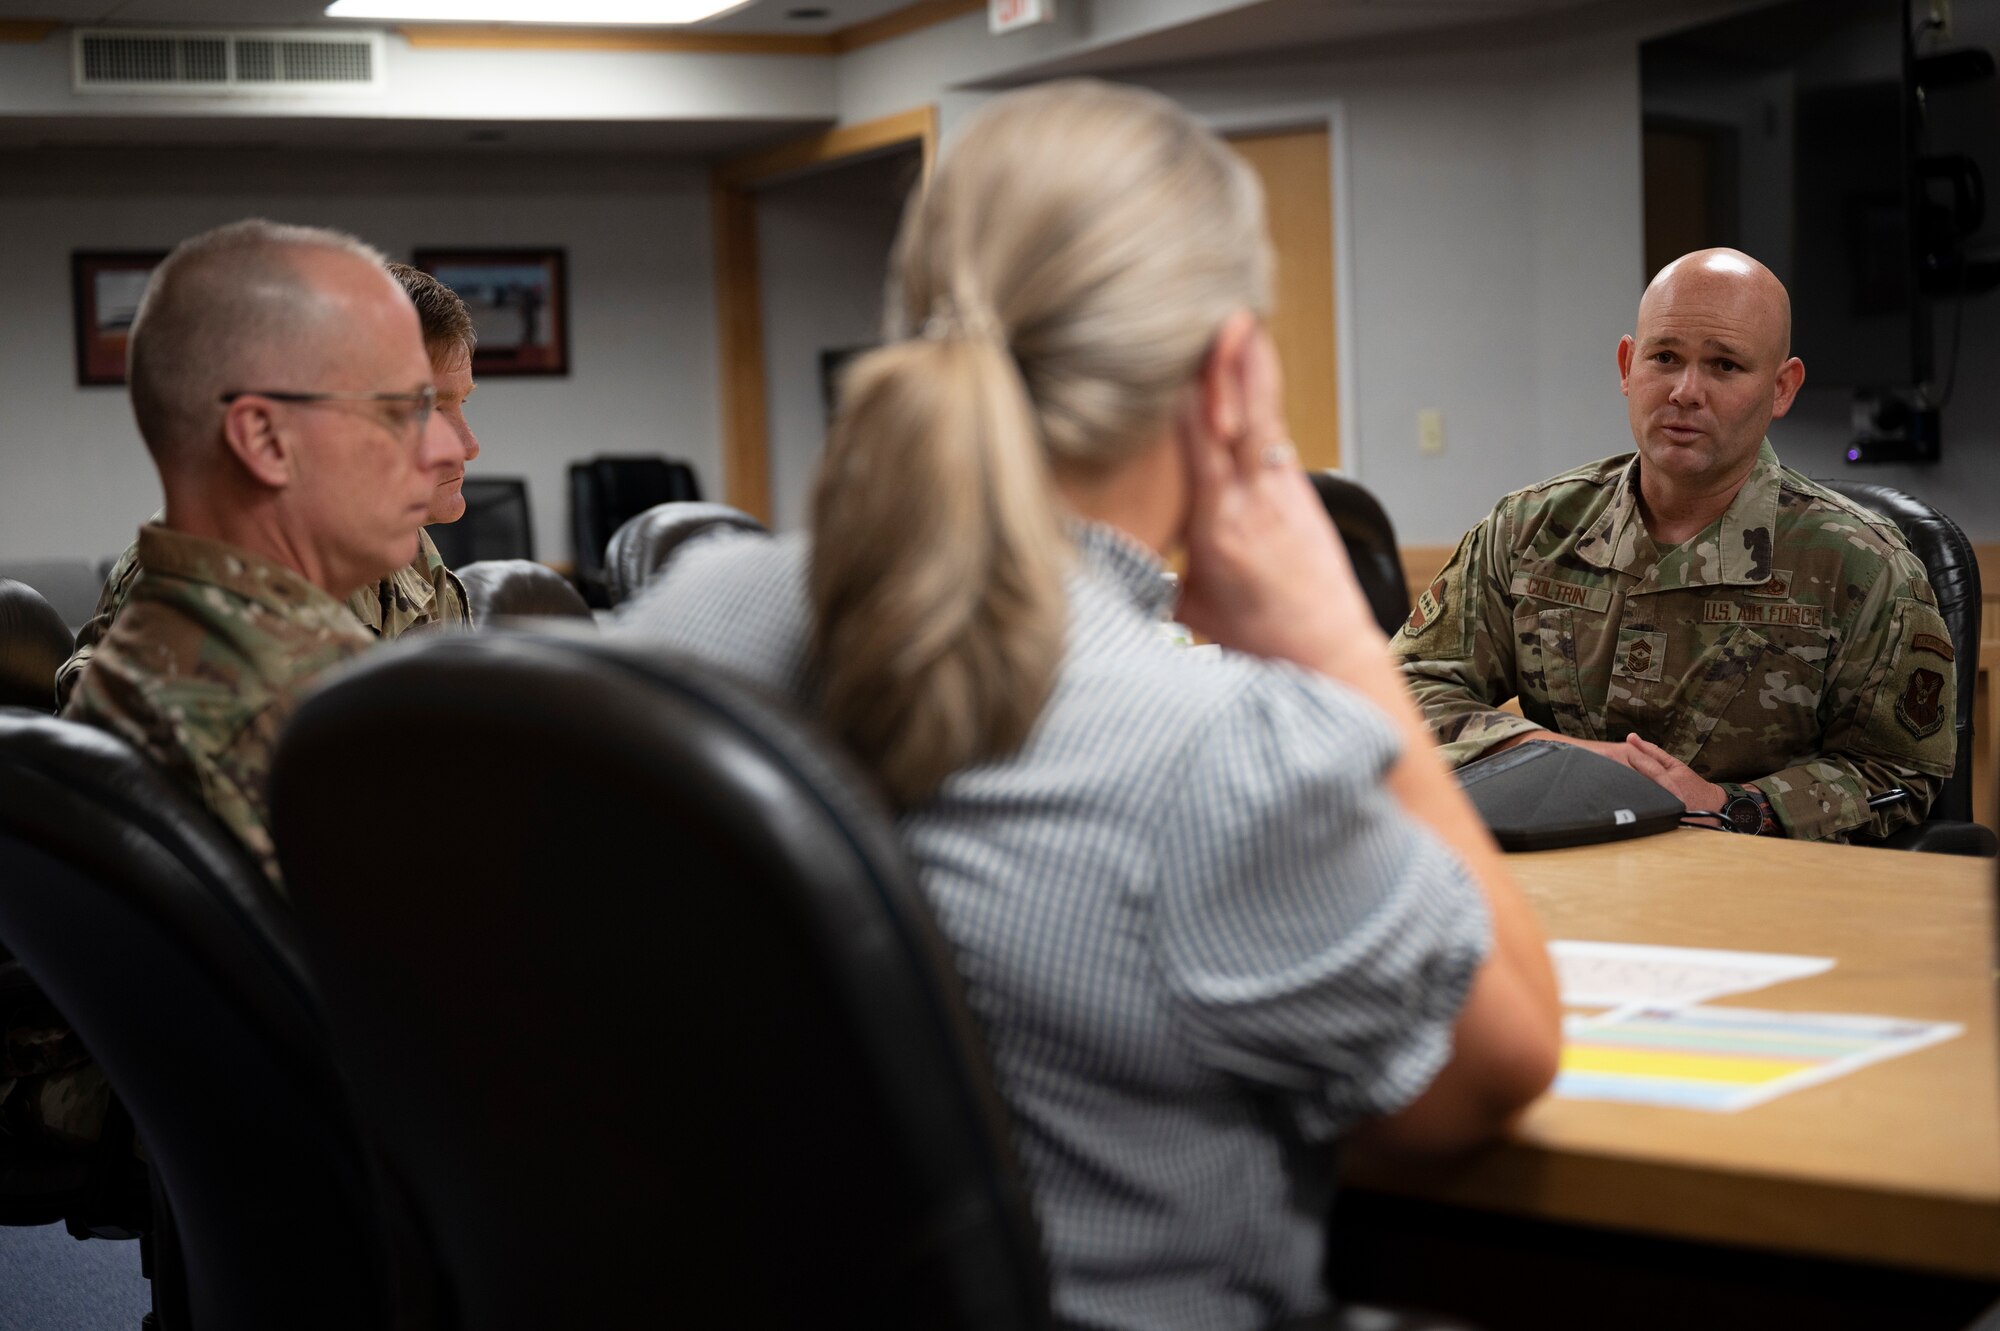 Chief Master Sgt. Matthew Coltrin, 7th Bomb Wing command chief, right, briefs Lt. Gen. Mark Weatherington, Air Force Global Strike Command deputy commander, at Dyess Air Force Base, Texas, Sept. 23rd, 2022. Coltrin’s briefing covered the base’s Airmen quality of life, among other topics. (U.S. Air Force photo by Senior Airman Reilly McGuire)